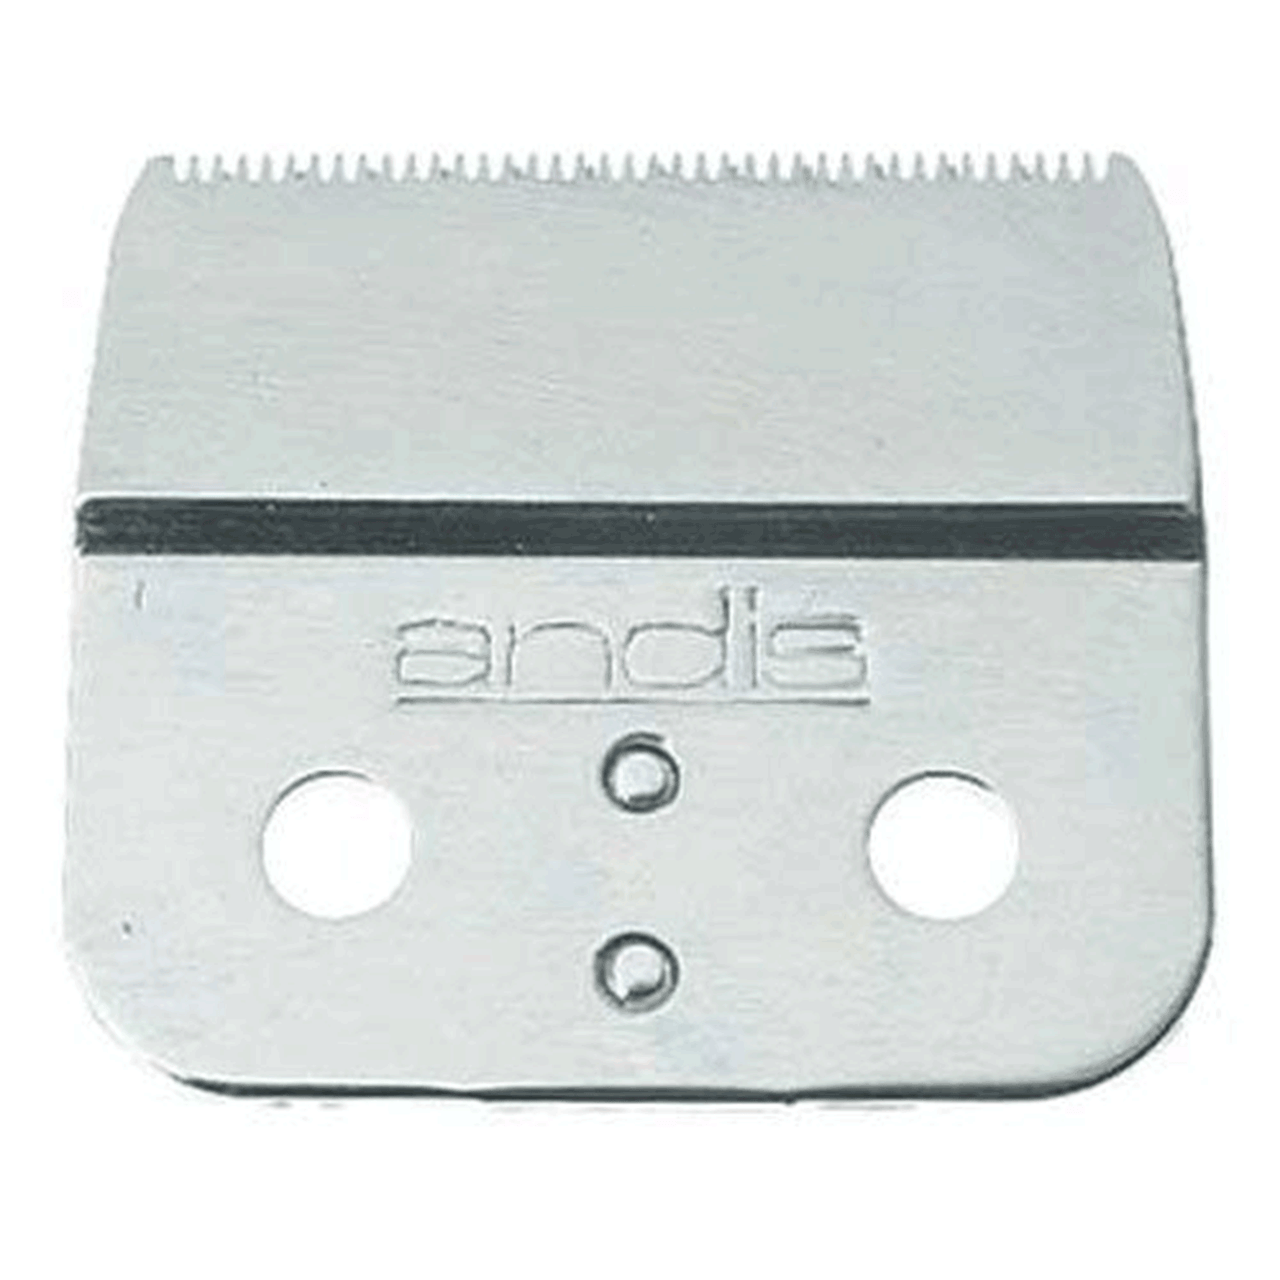 Andis Outliner II Replacement Blade 1 Each